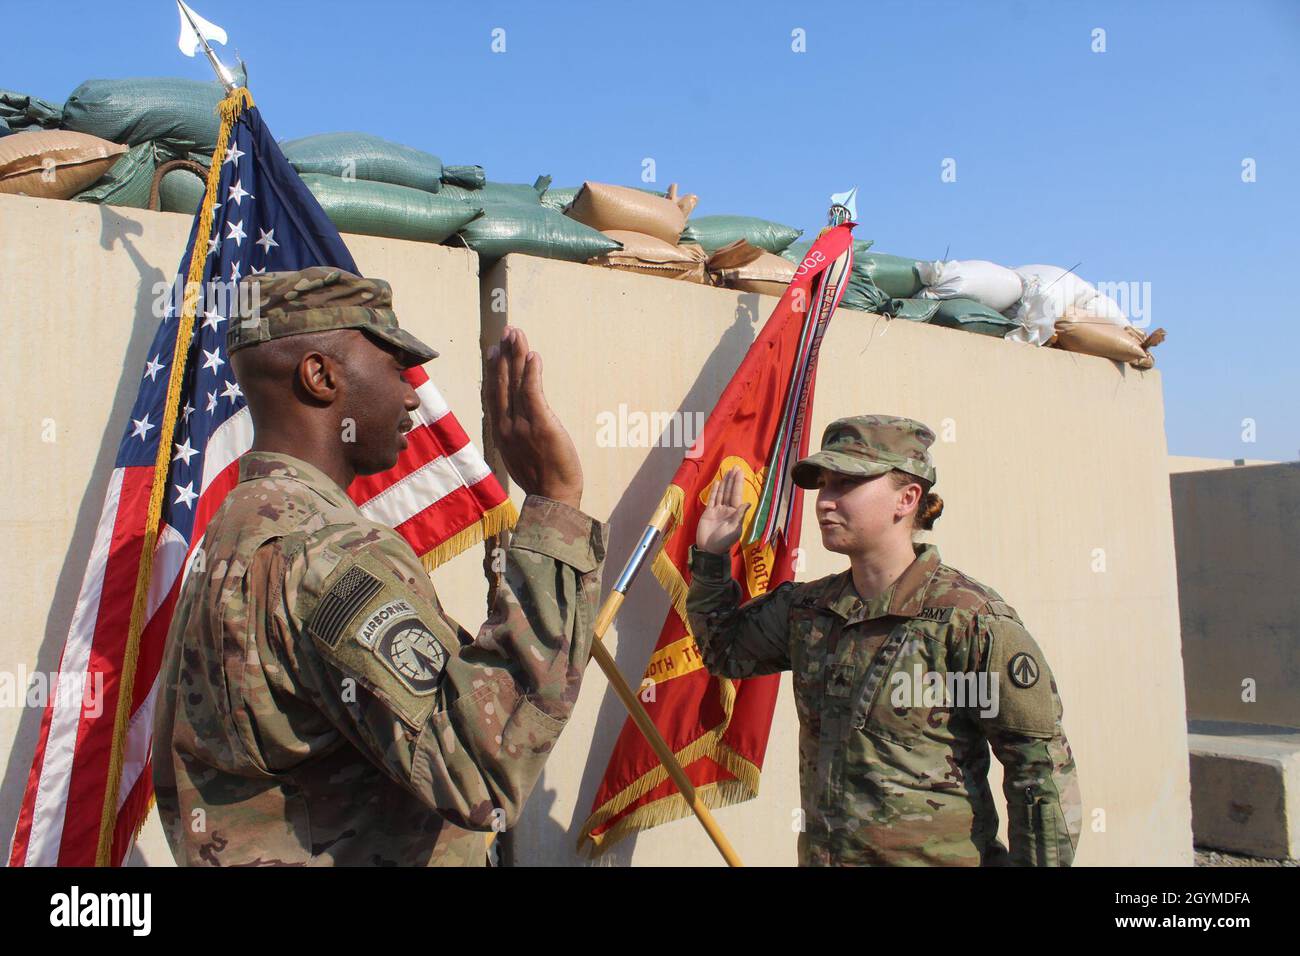 Maj. Patrick Smith, 840th Transportation Battalion, administers the oath of enlistment to Sgt. Ashlee S. Heckler, 840th Trans. Bn., during a ceremony at Camp Arifjan, Kuwait, Jan. 31, 2020. (U.S. Army photo by Claudia LaMantia) Stock Photo